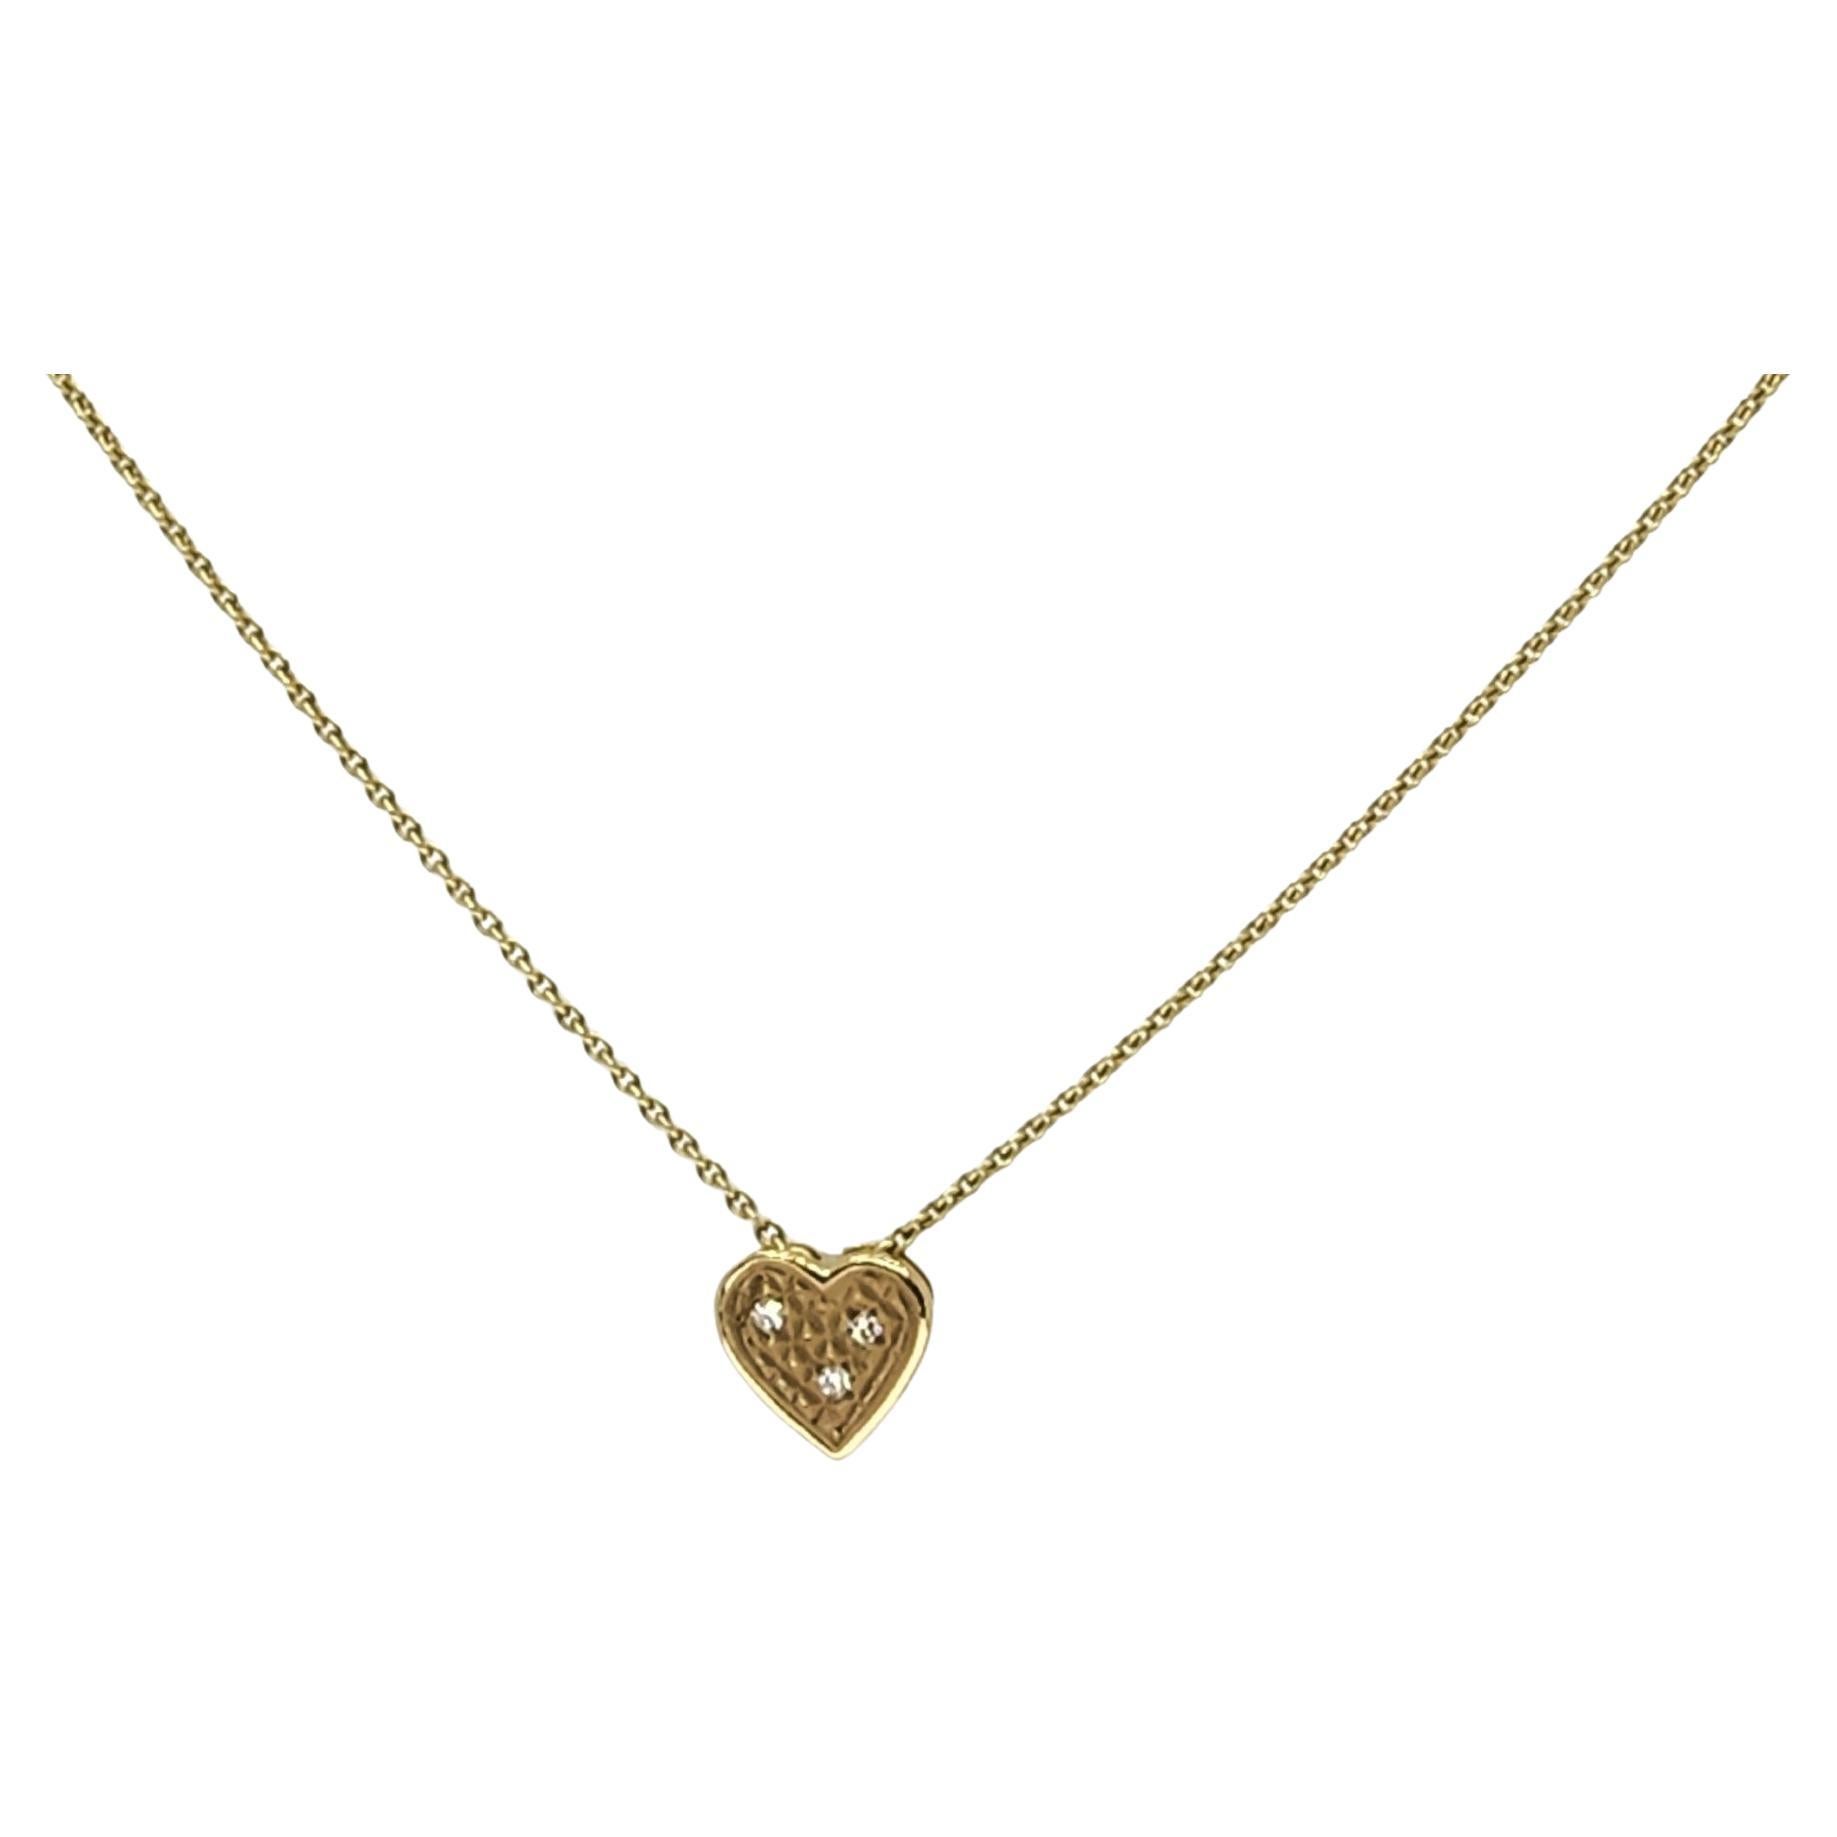 Gold Heart Slide with Diamonds and Pyramid Pattern Necklace in 18K Gold